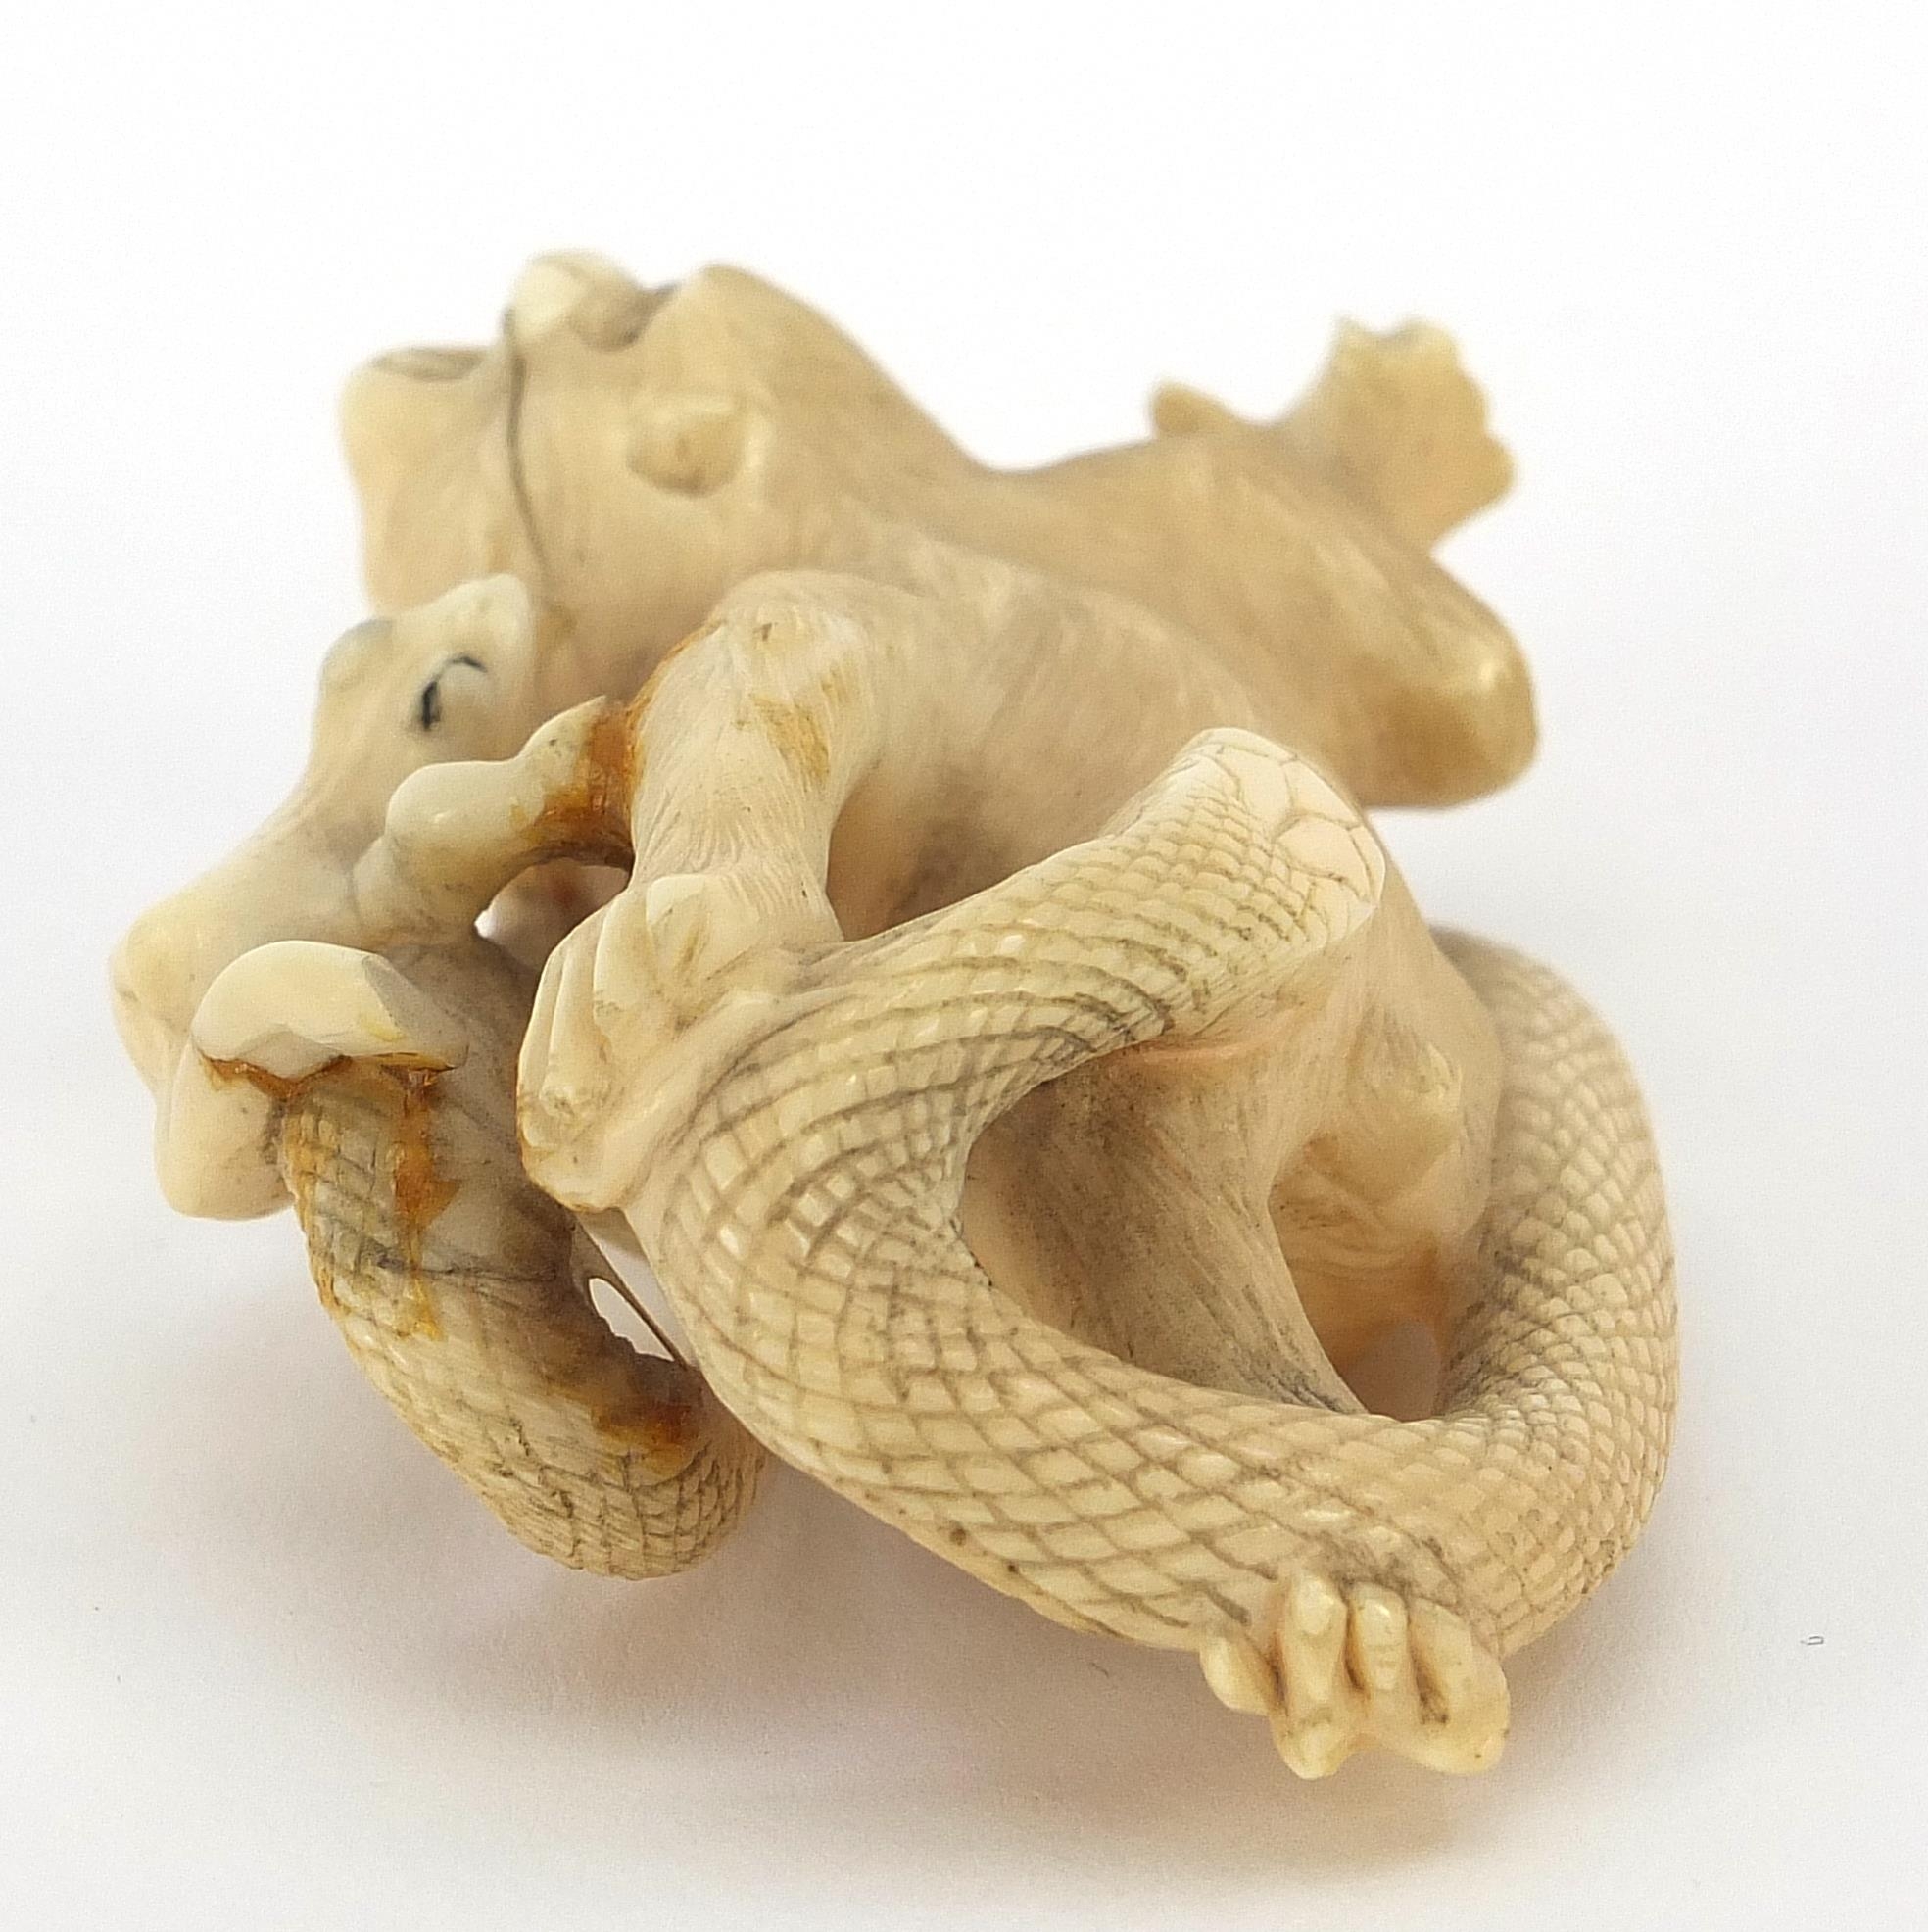 Japanese carved ivory okimono depicting monkeys, frogs and a snake, 8cm in length - Image 3 of 7